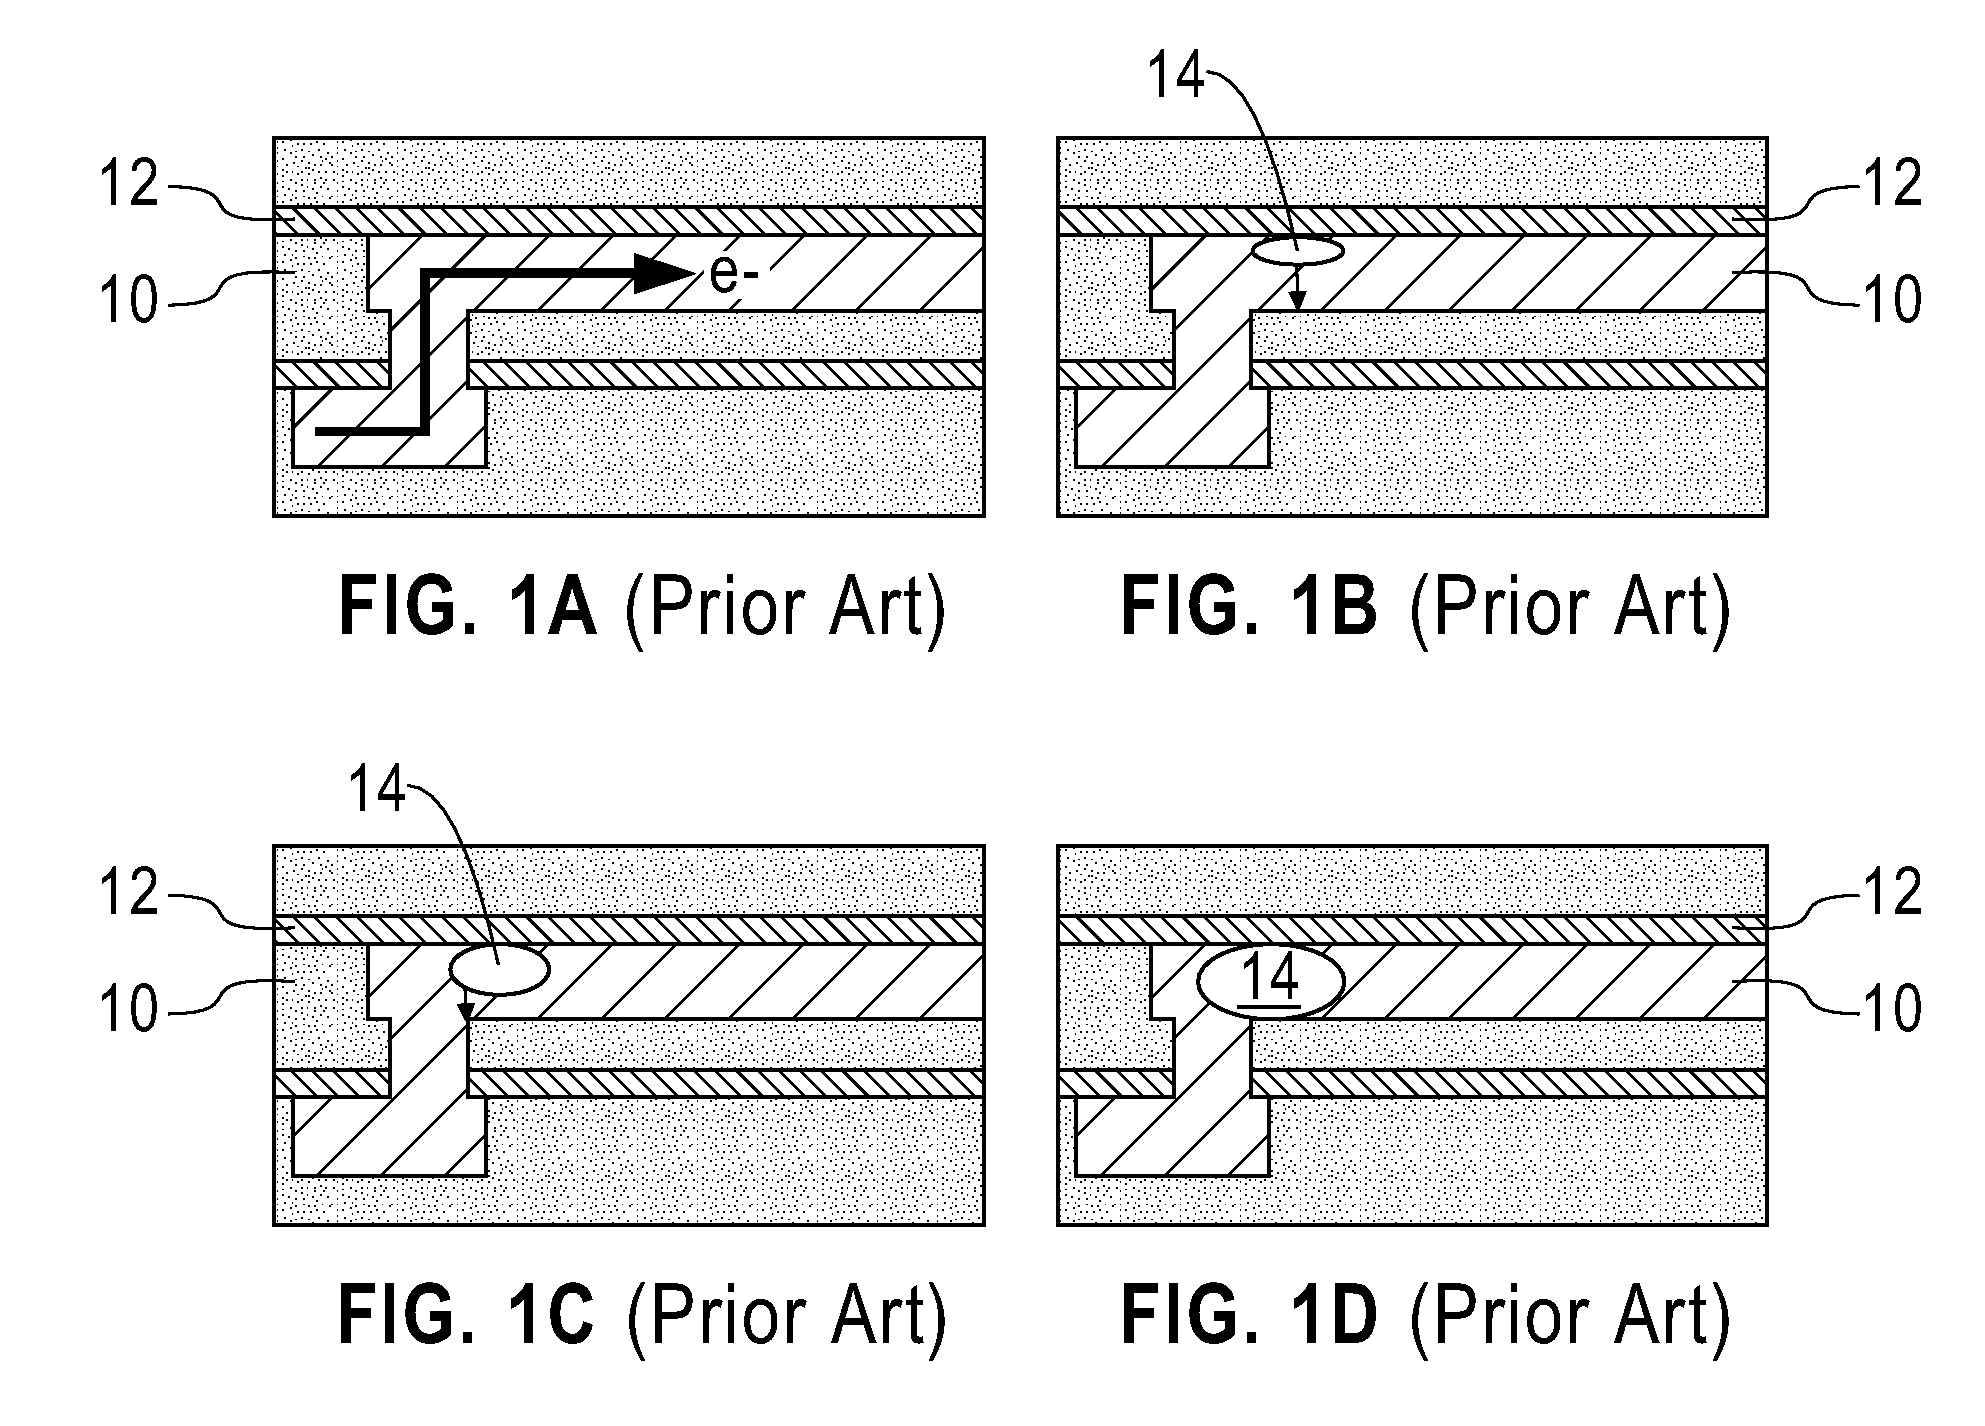 Nitrogen-containing metal cap for interconnect structures